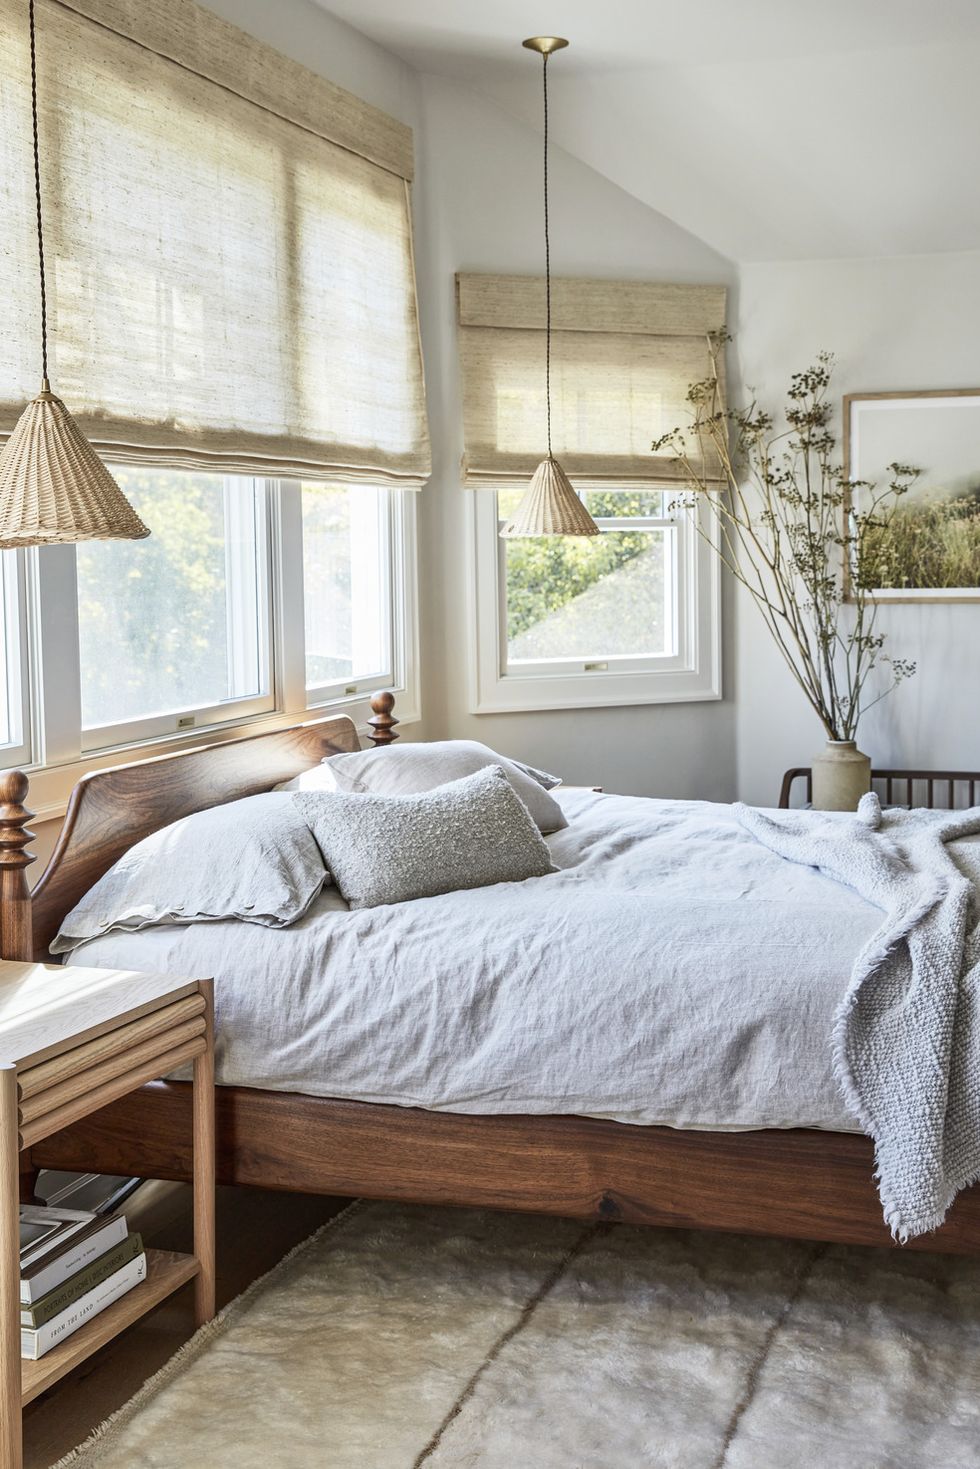 Dreamy Guest Bedroom Decorating Ideas for the Holidays